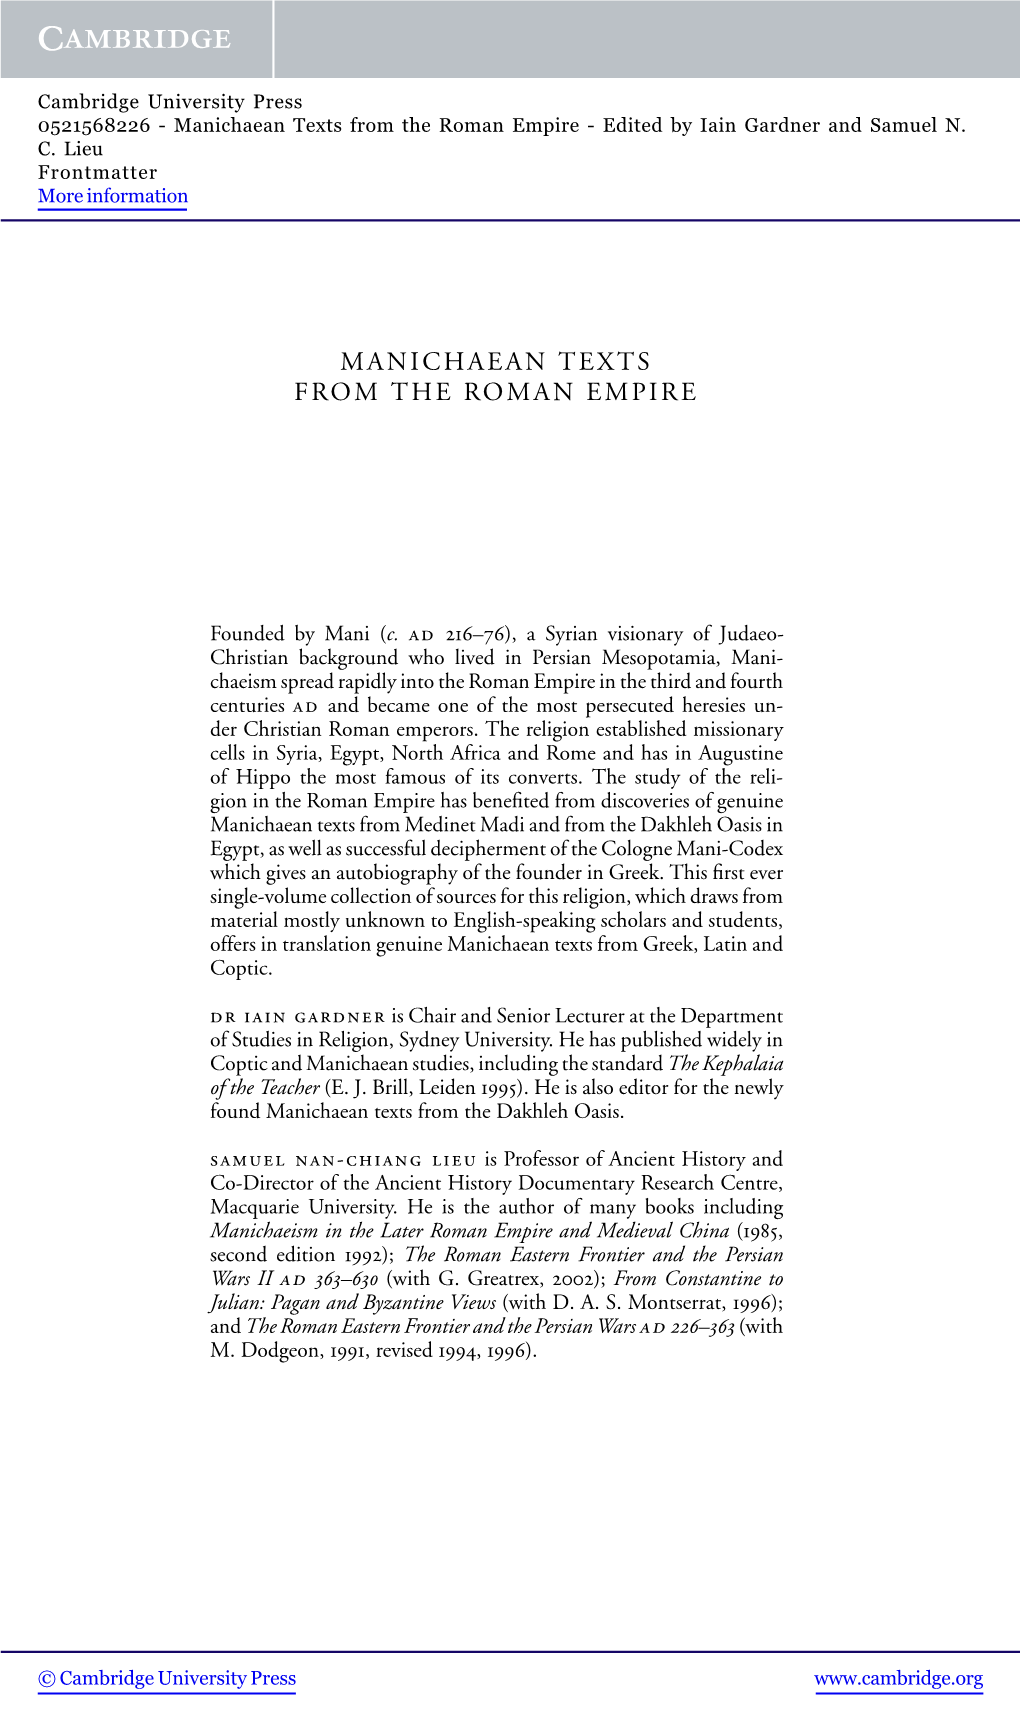 Manichaean Texts from the Roman Empire - Edited by Iain Gardner and Samuel N